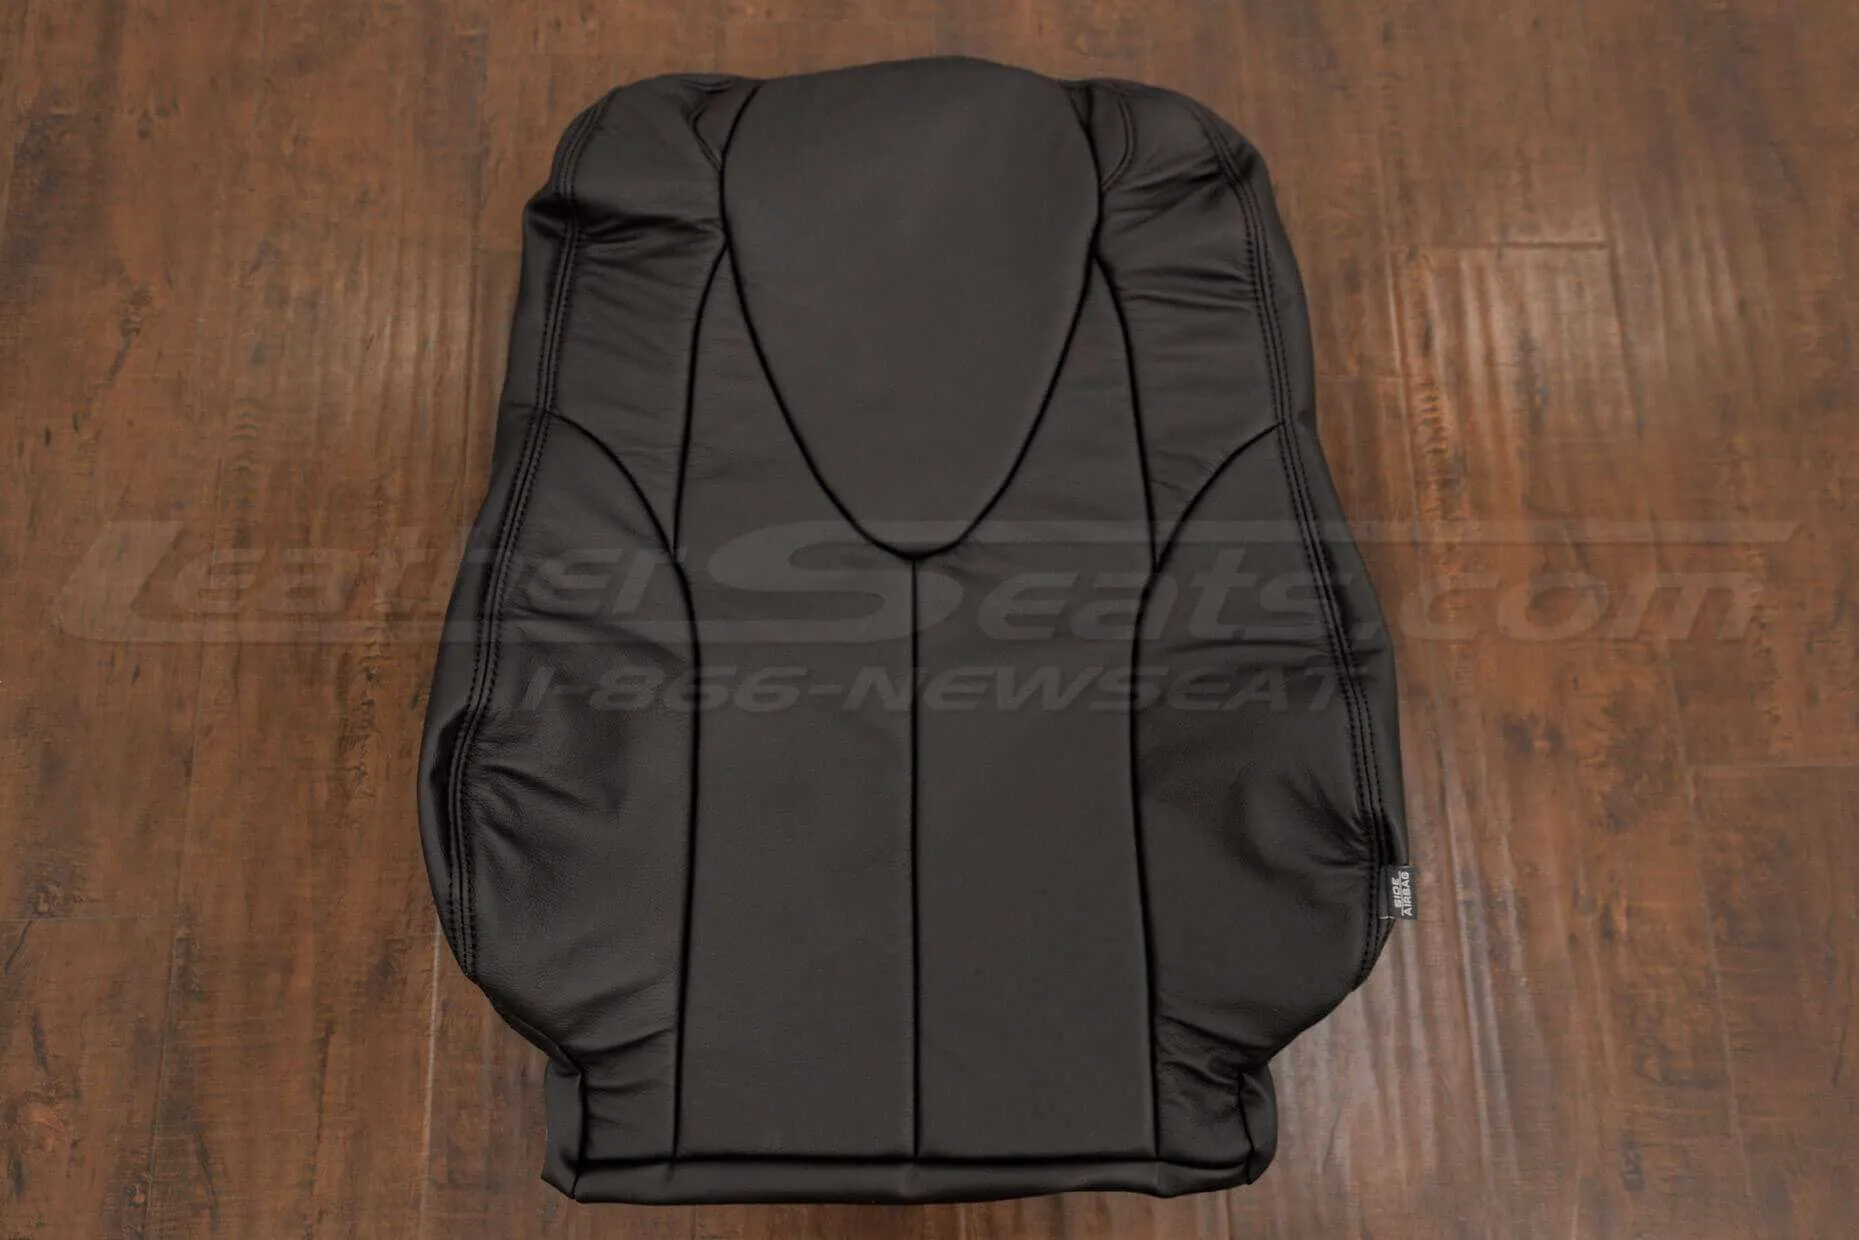 Toyota Camry Leather Seat Kit - Black - Front backrest upholstery